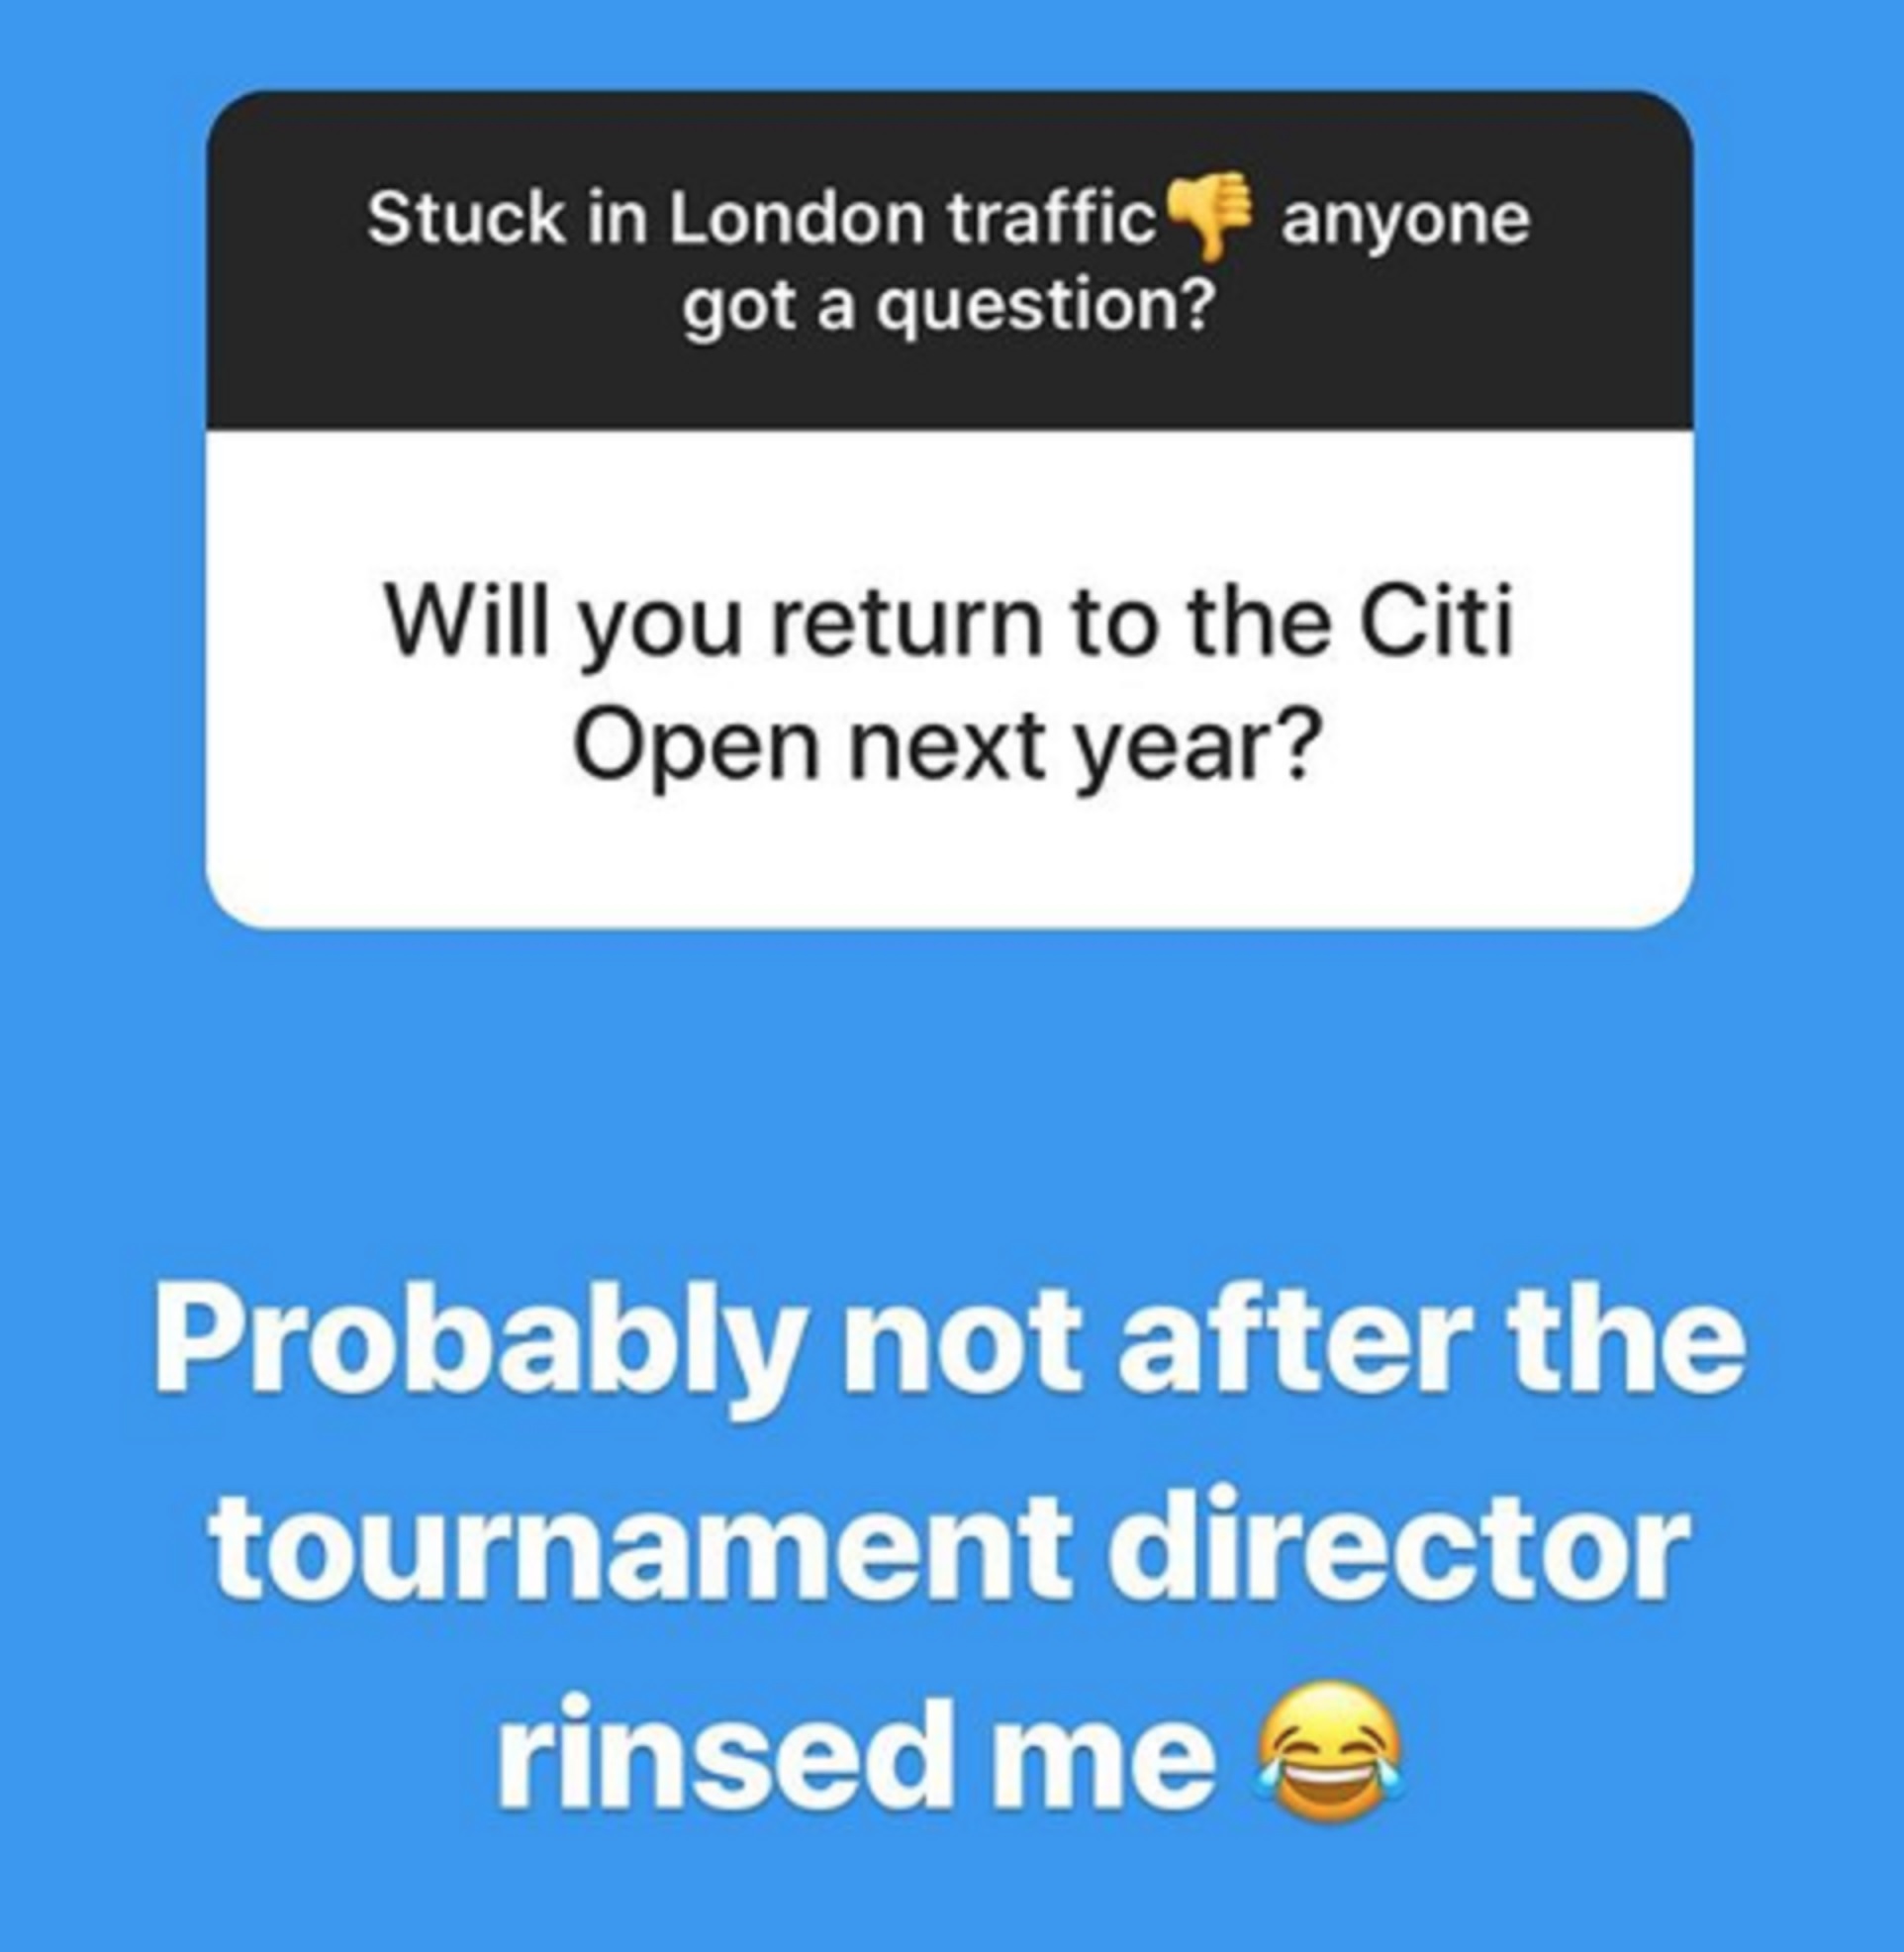 A screen grab from Andy Murray's Instagram Stories